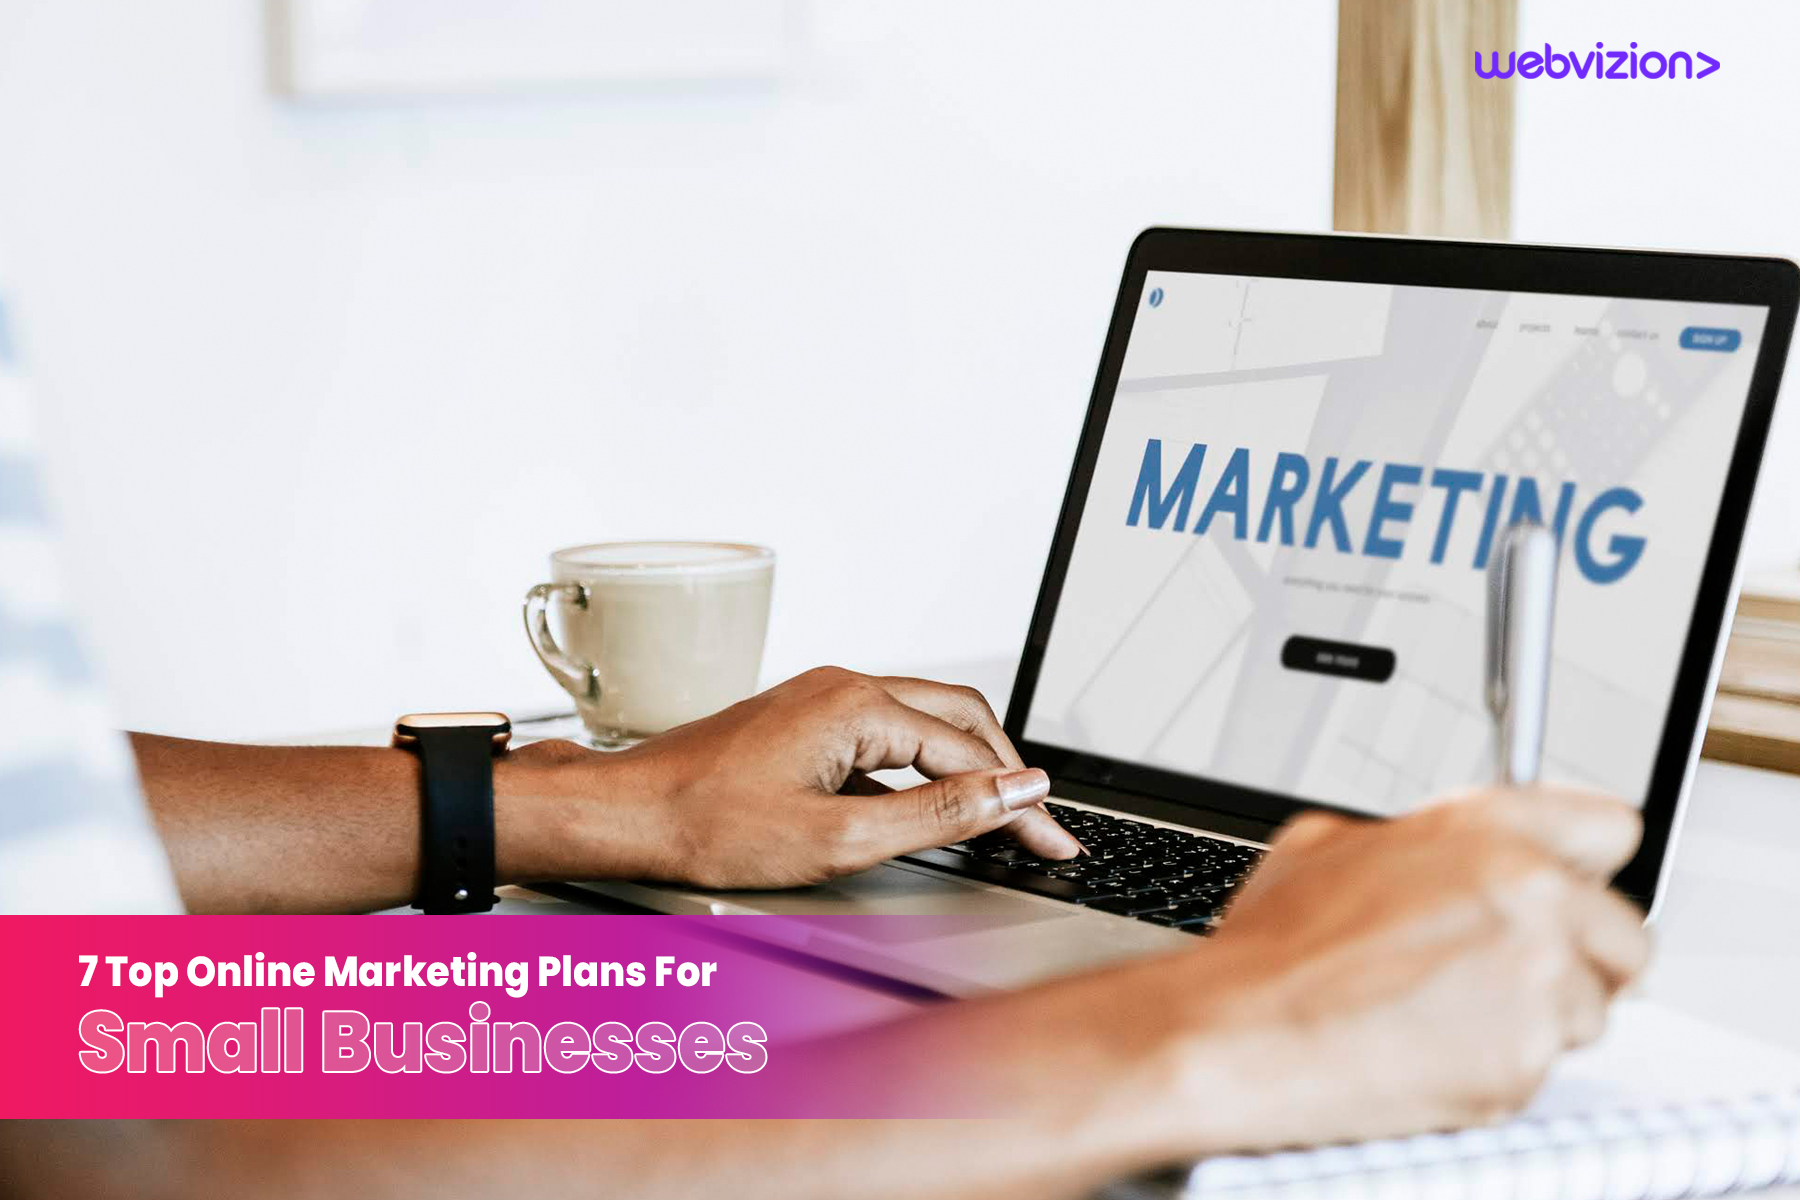 7 Top Online Marketing Plans For Small Businesses